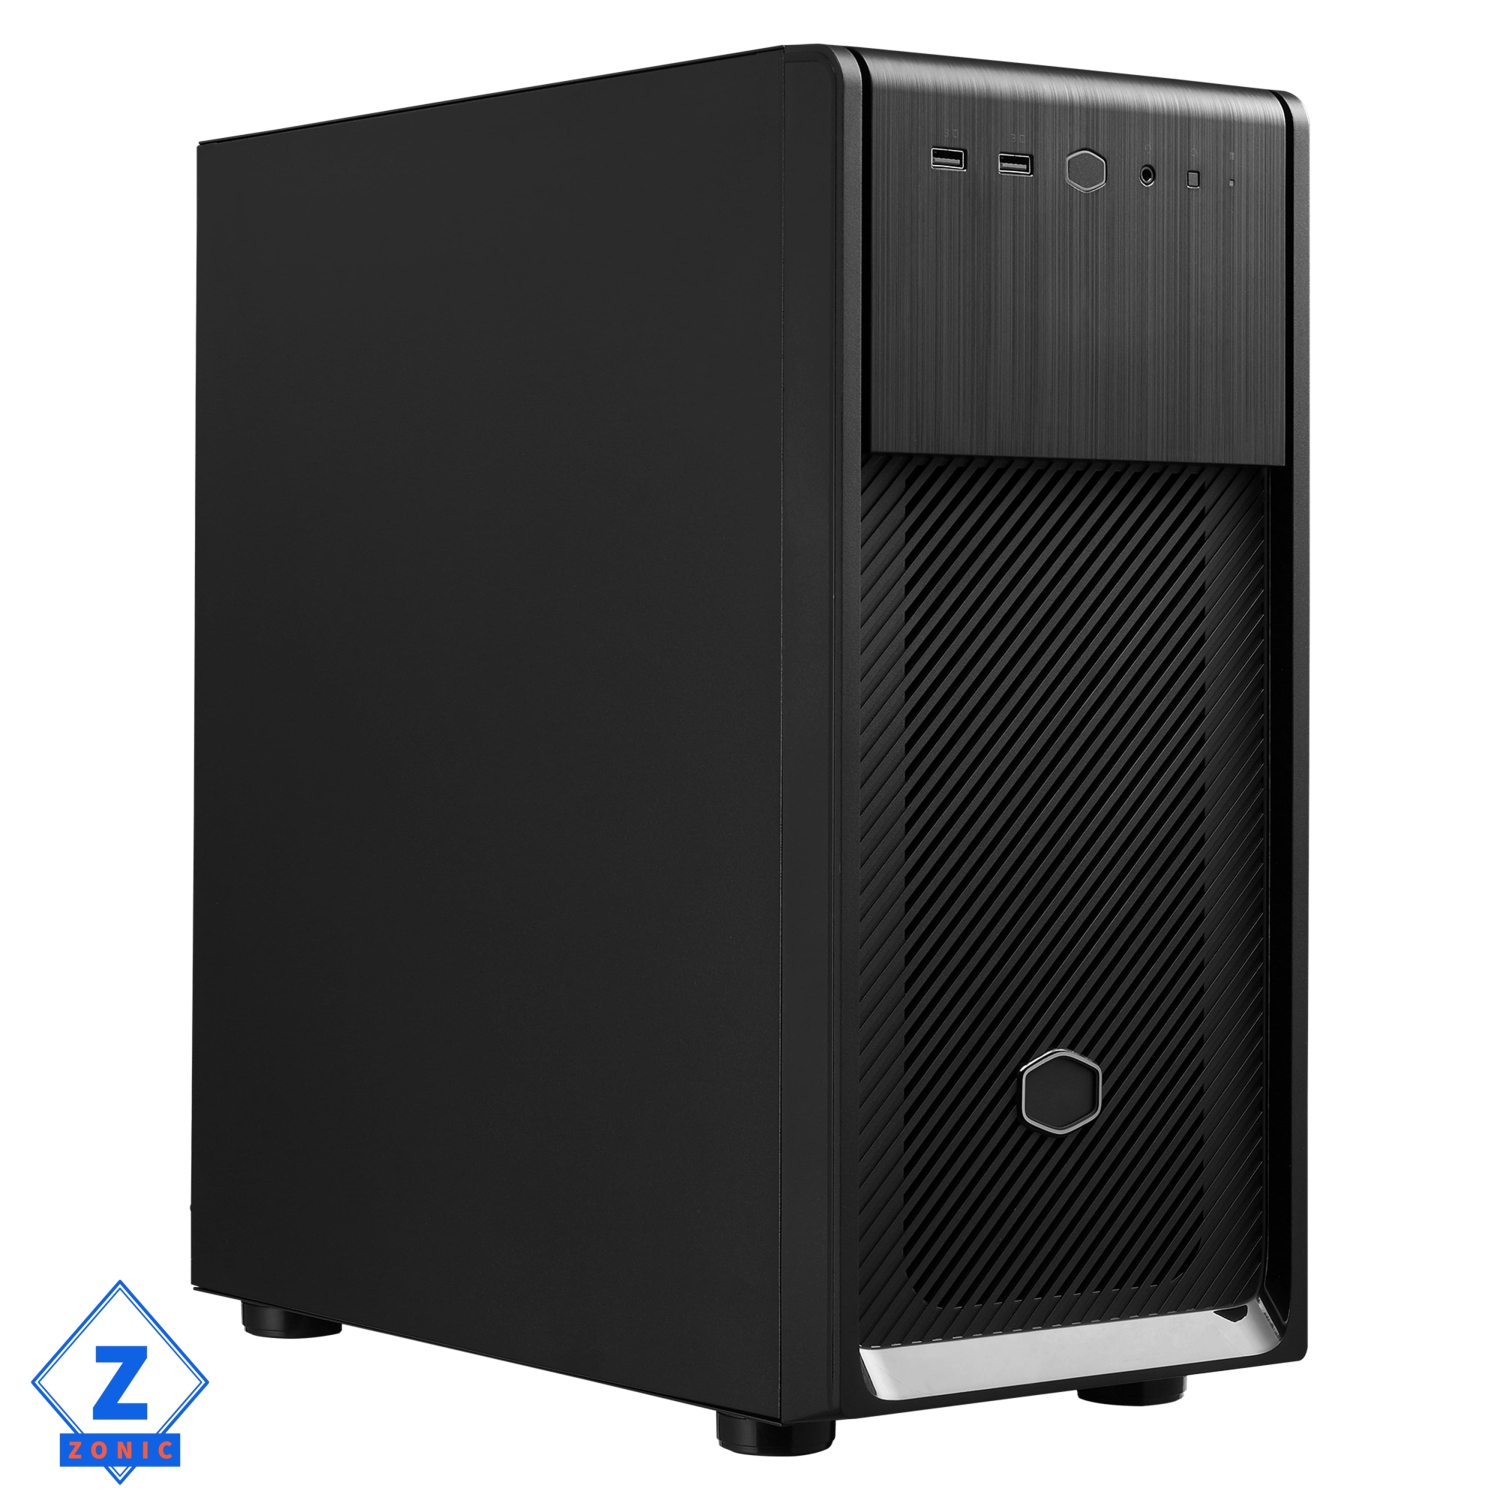 Zonic Business Custom PC, Intel Core i9-12900K, 16 Cores, 2 TB NVME SSD , 64 GB DDR 5 RAM, Build in WIFI , Keyboard, and Mouse, Windows 11 Pro